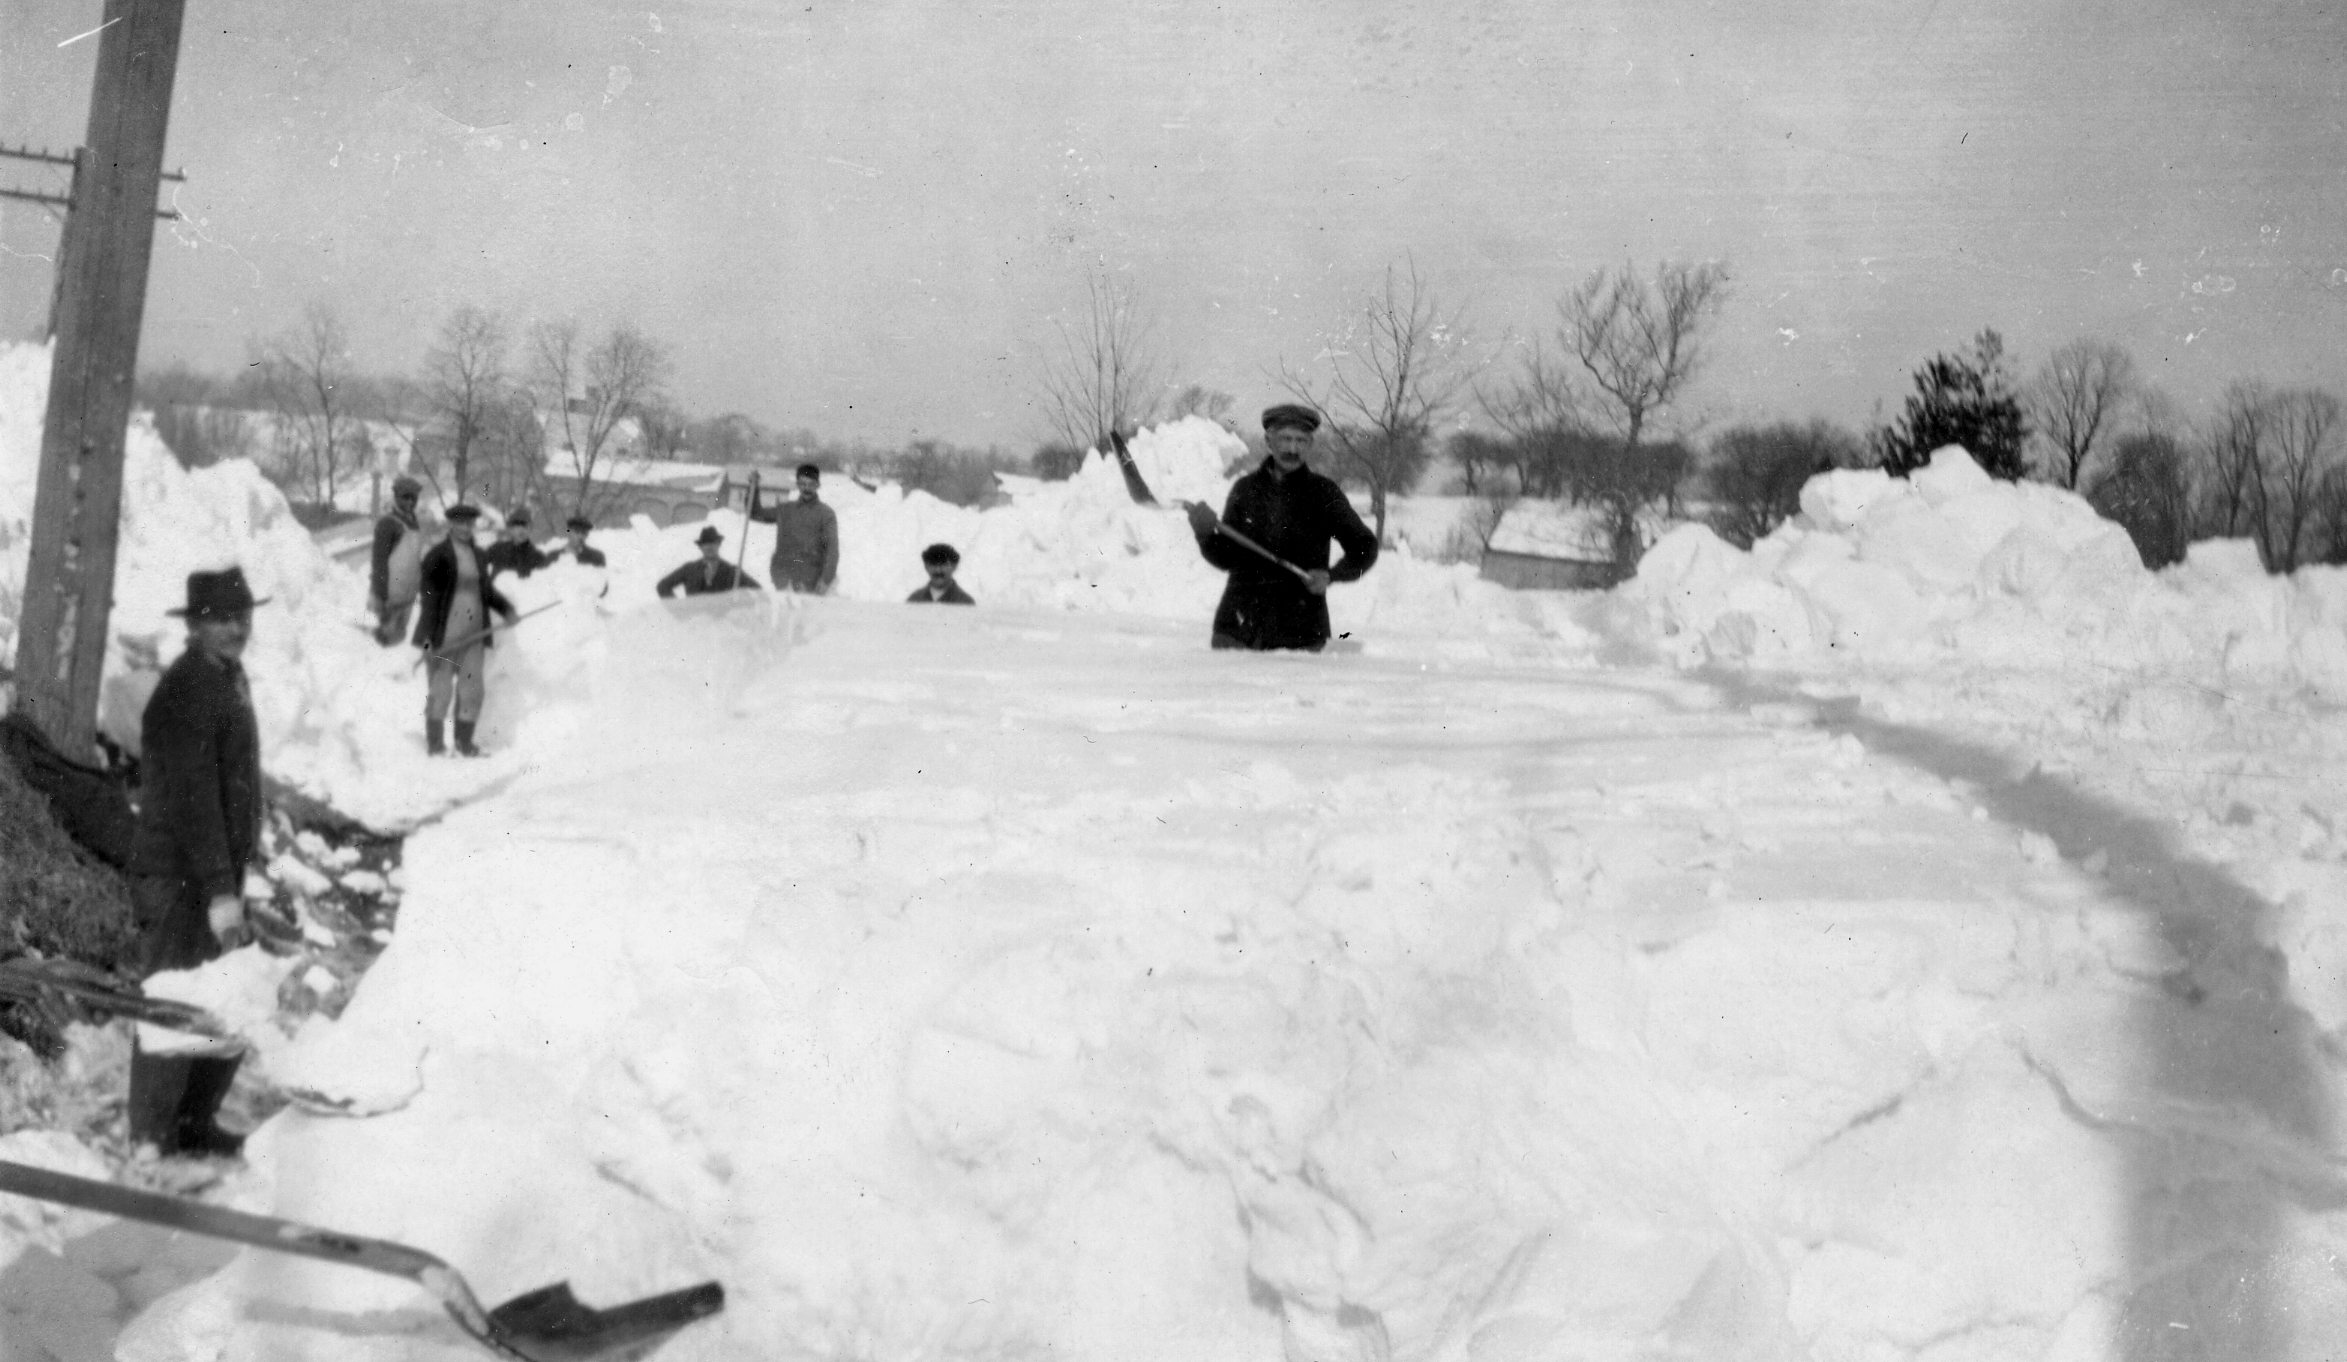 Black and white image of a group of people shoveling a large amount of snow.